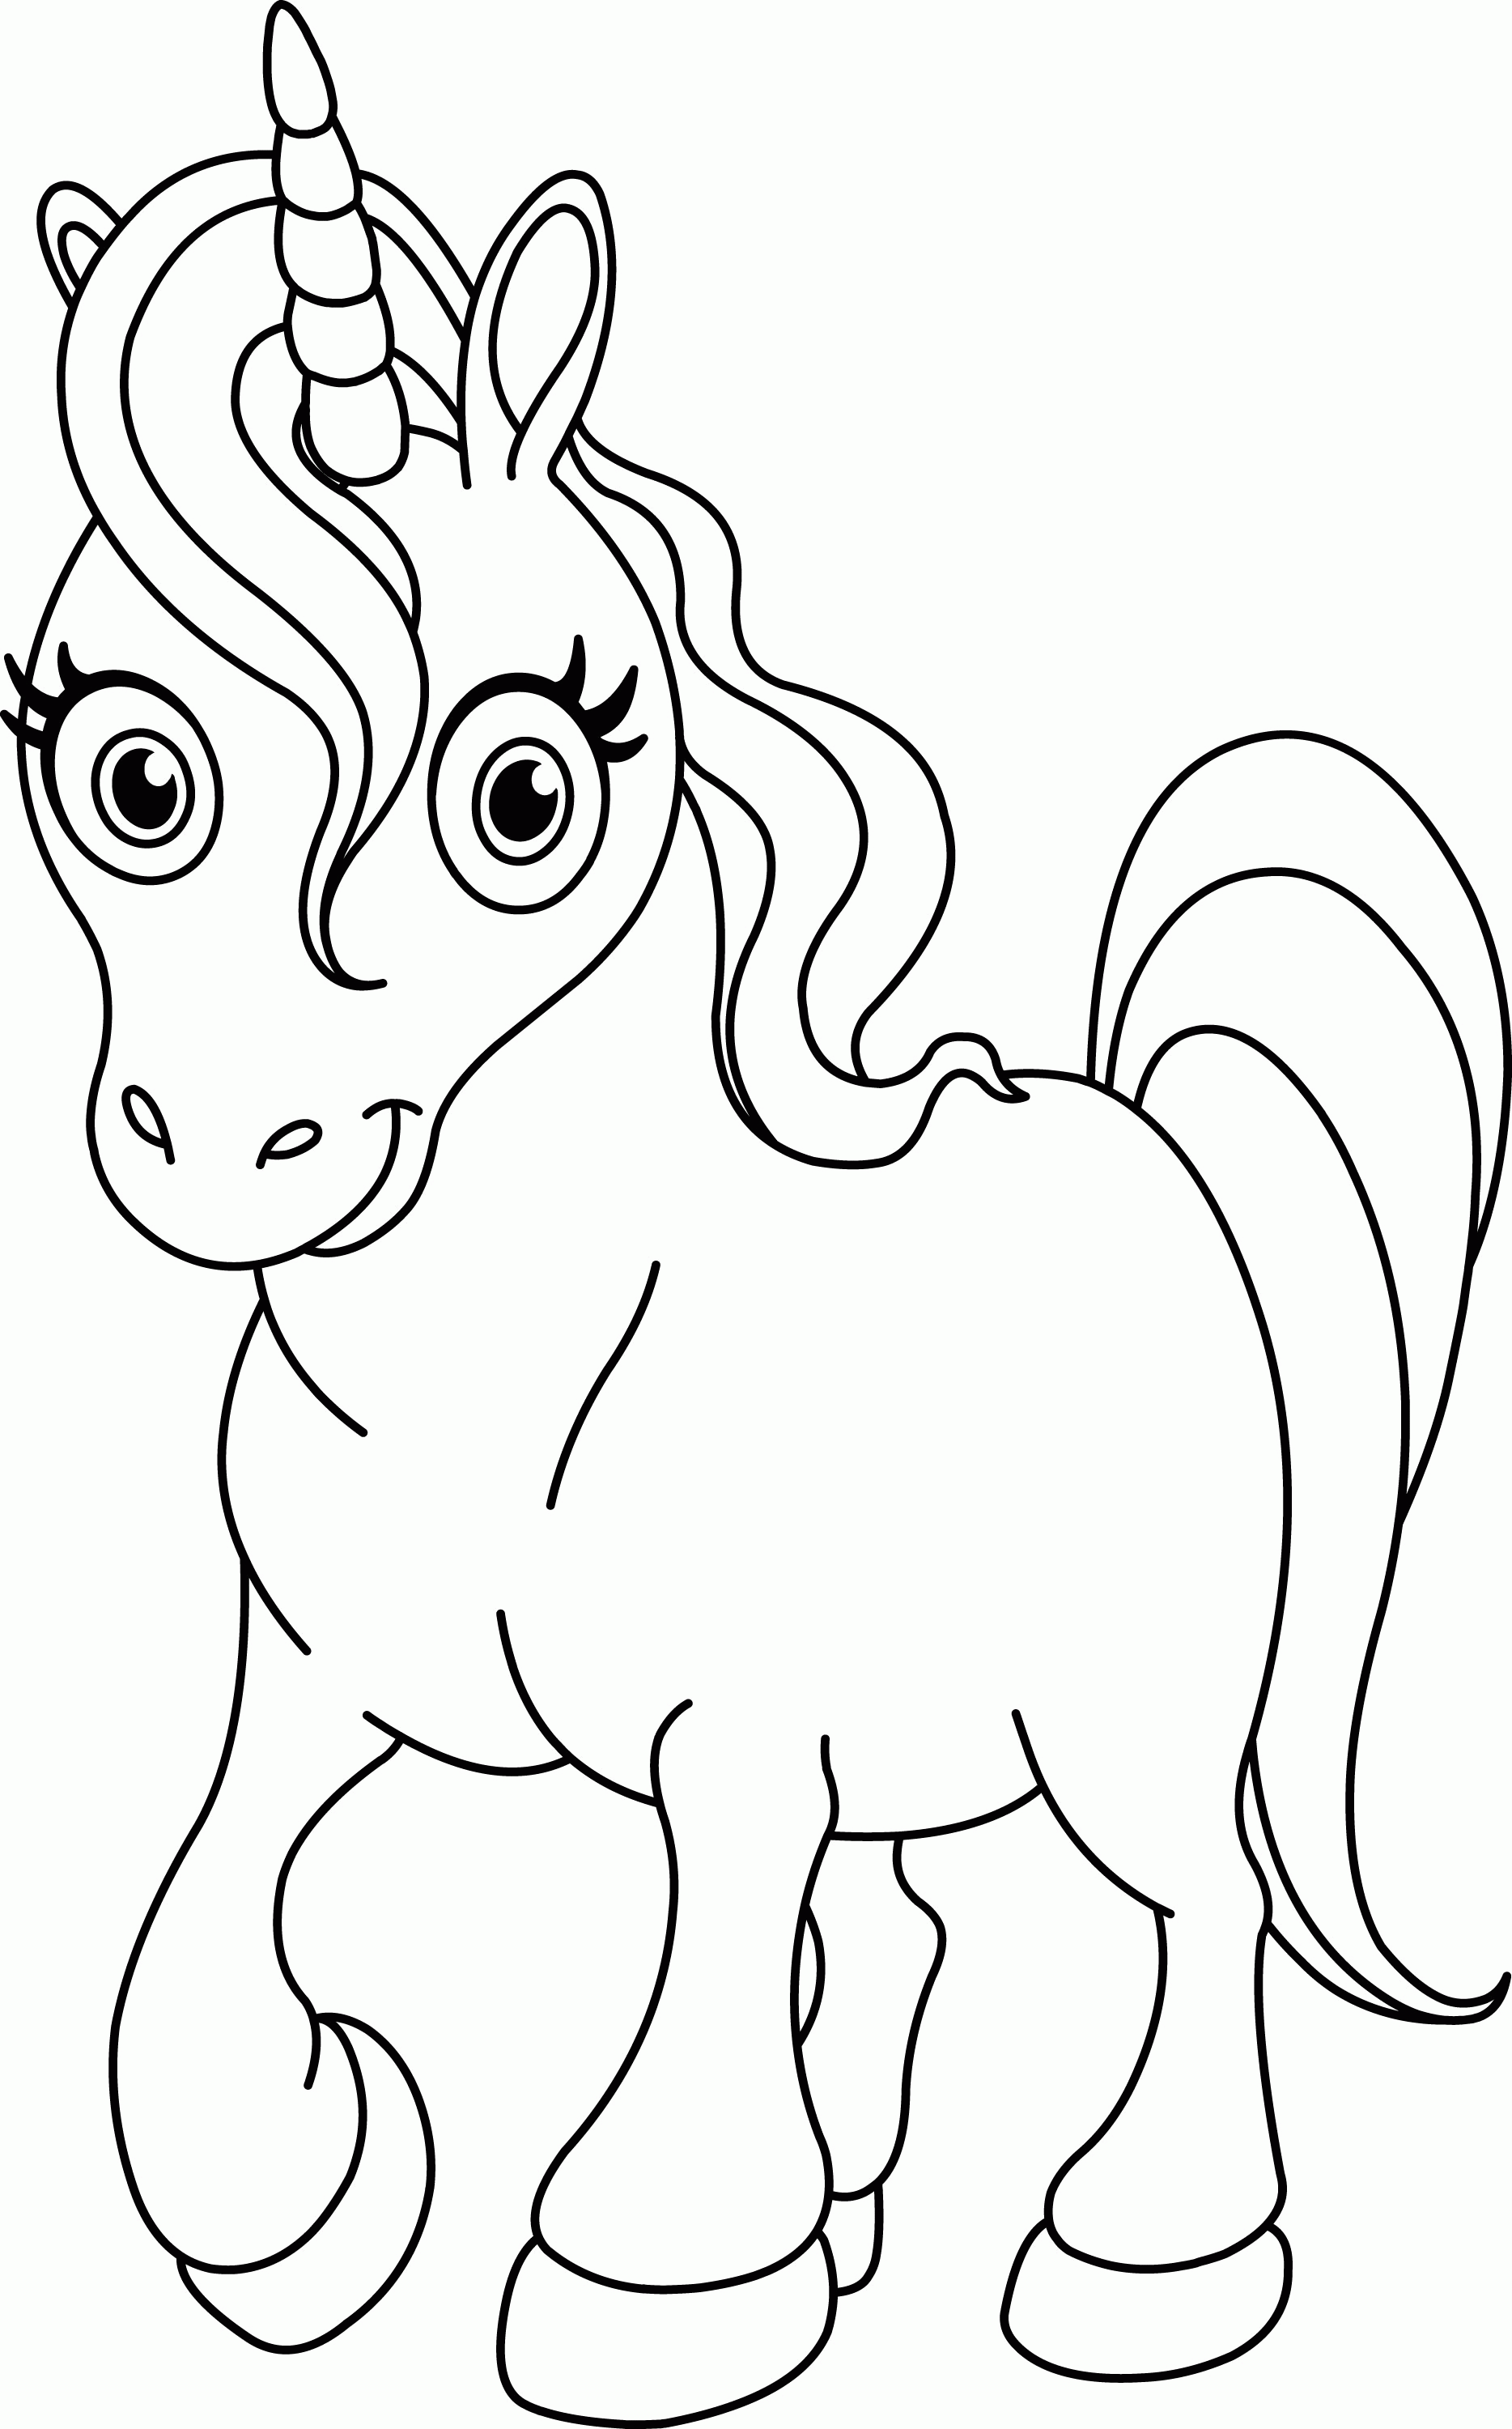 free coloring pages of unicorn jump - VoteForVerde.com